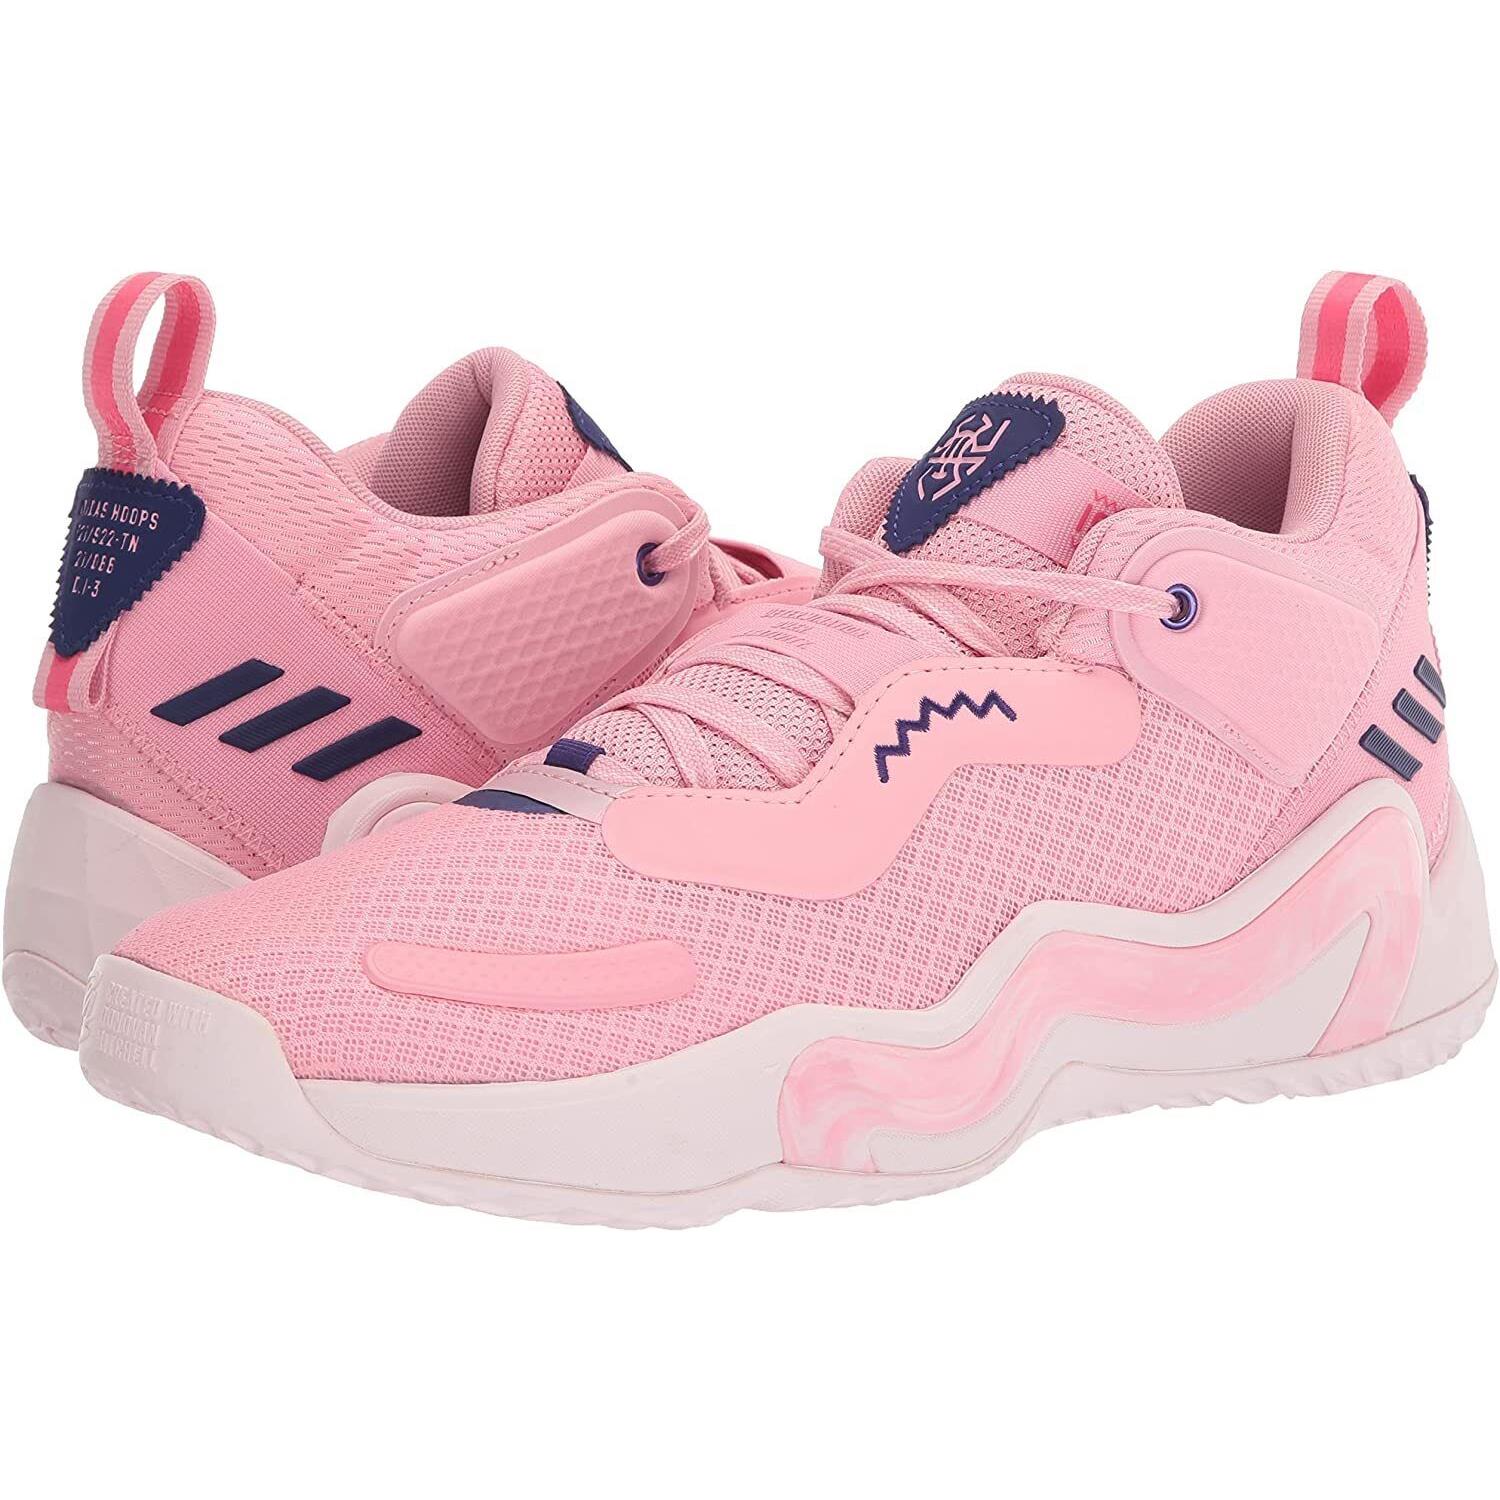 Adidas D.o.n. Issue 3 Men`s Basketball Shoes Training Sneakers Pink GW3643